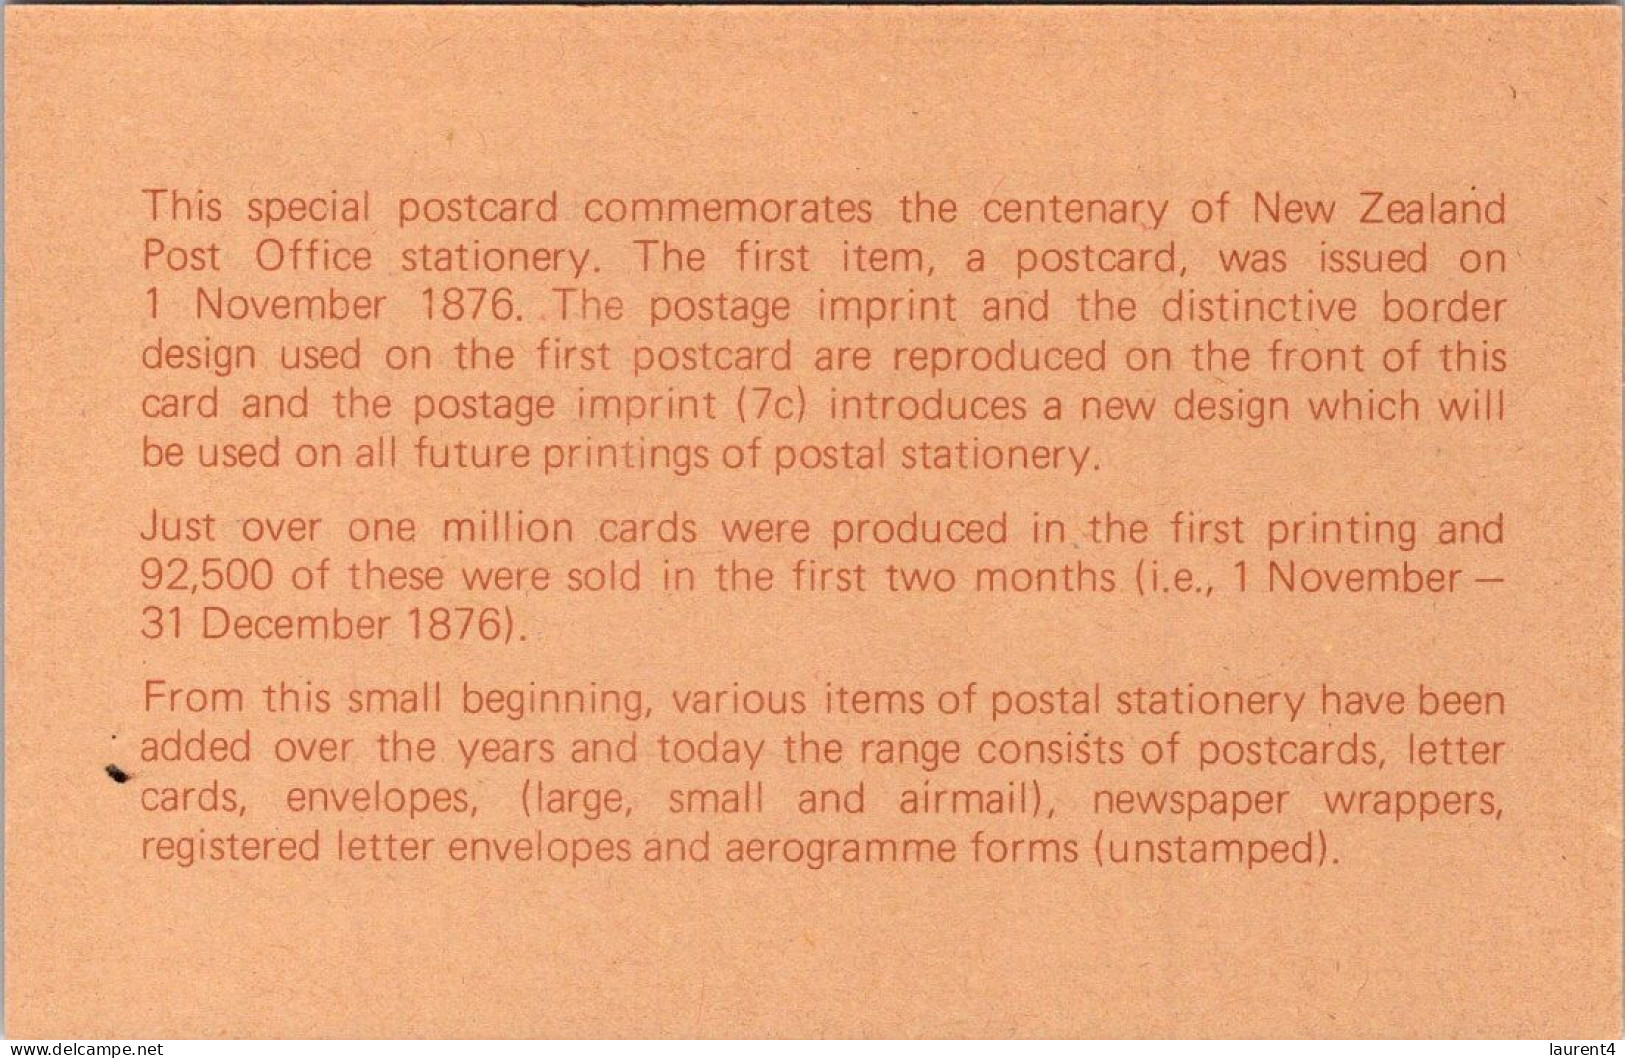 26-4-2024 (4 Y 6) Centenary Of The First Postcard Issued In New Zealand (1-11-1876) 1-11-1976 (1 Card) - Poste & Postini